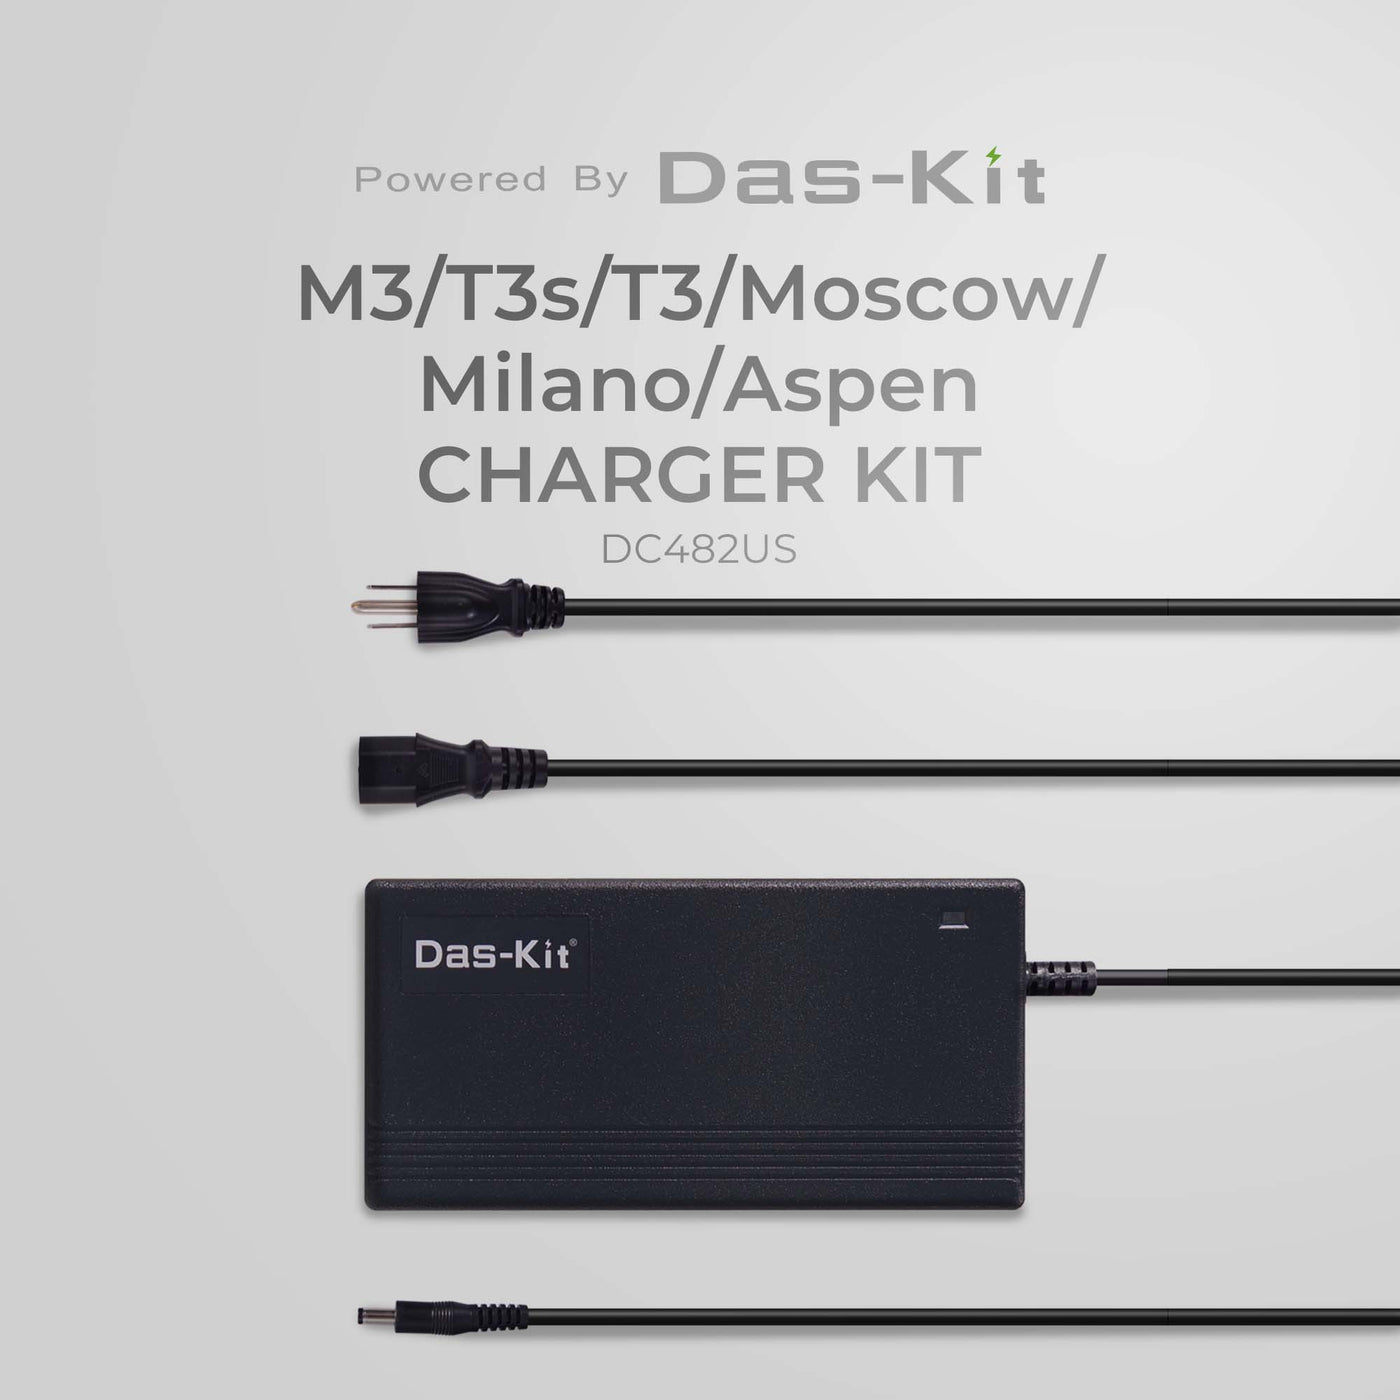 Charger Kit DC482US NCM M3/T3s/T3/Moscow/Milano/Aspen